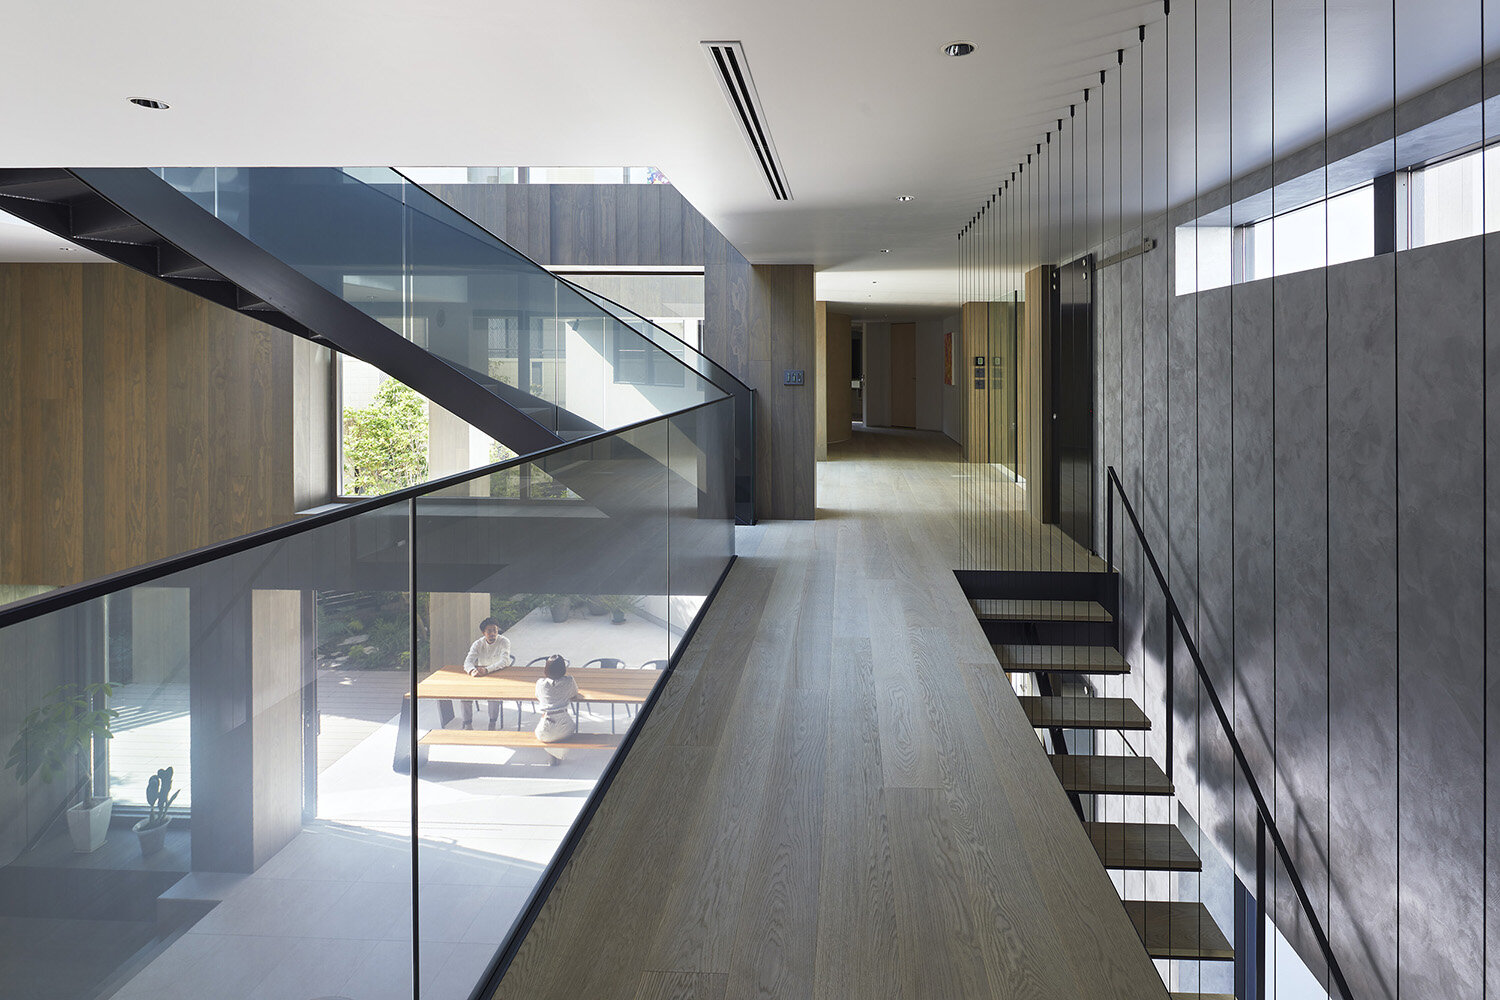  1st floor interior of ‘Shoto S’, a residence designed by Japanese architecture design studio SINATO led by Chikara Ono. 